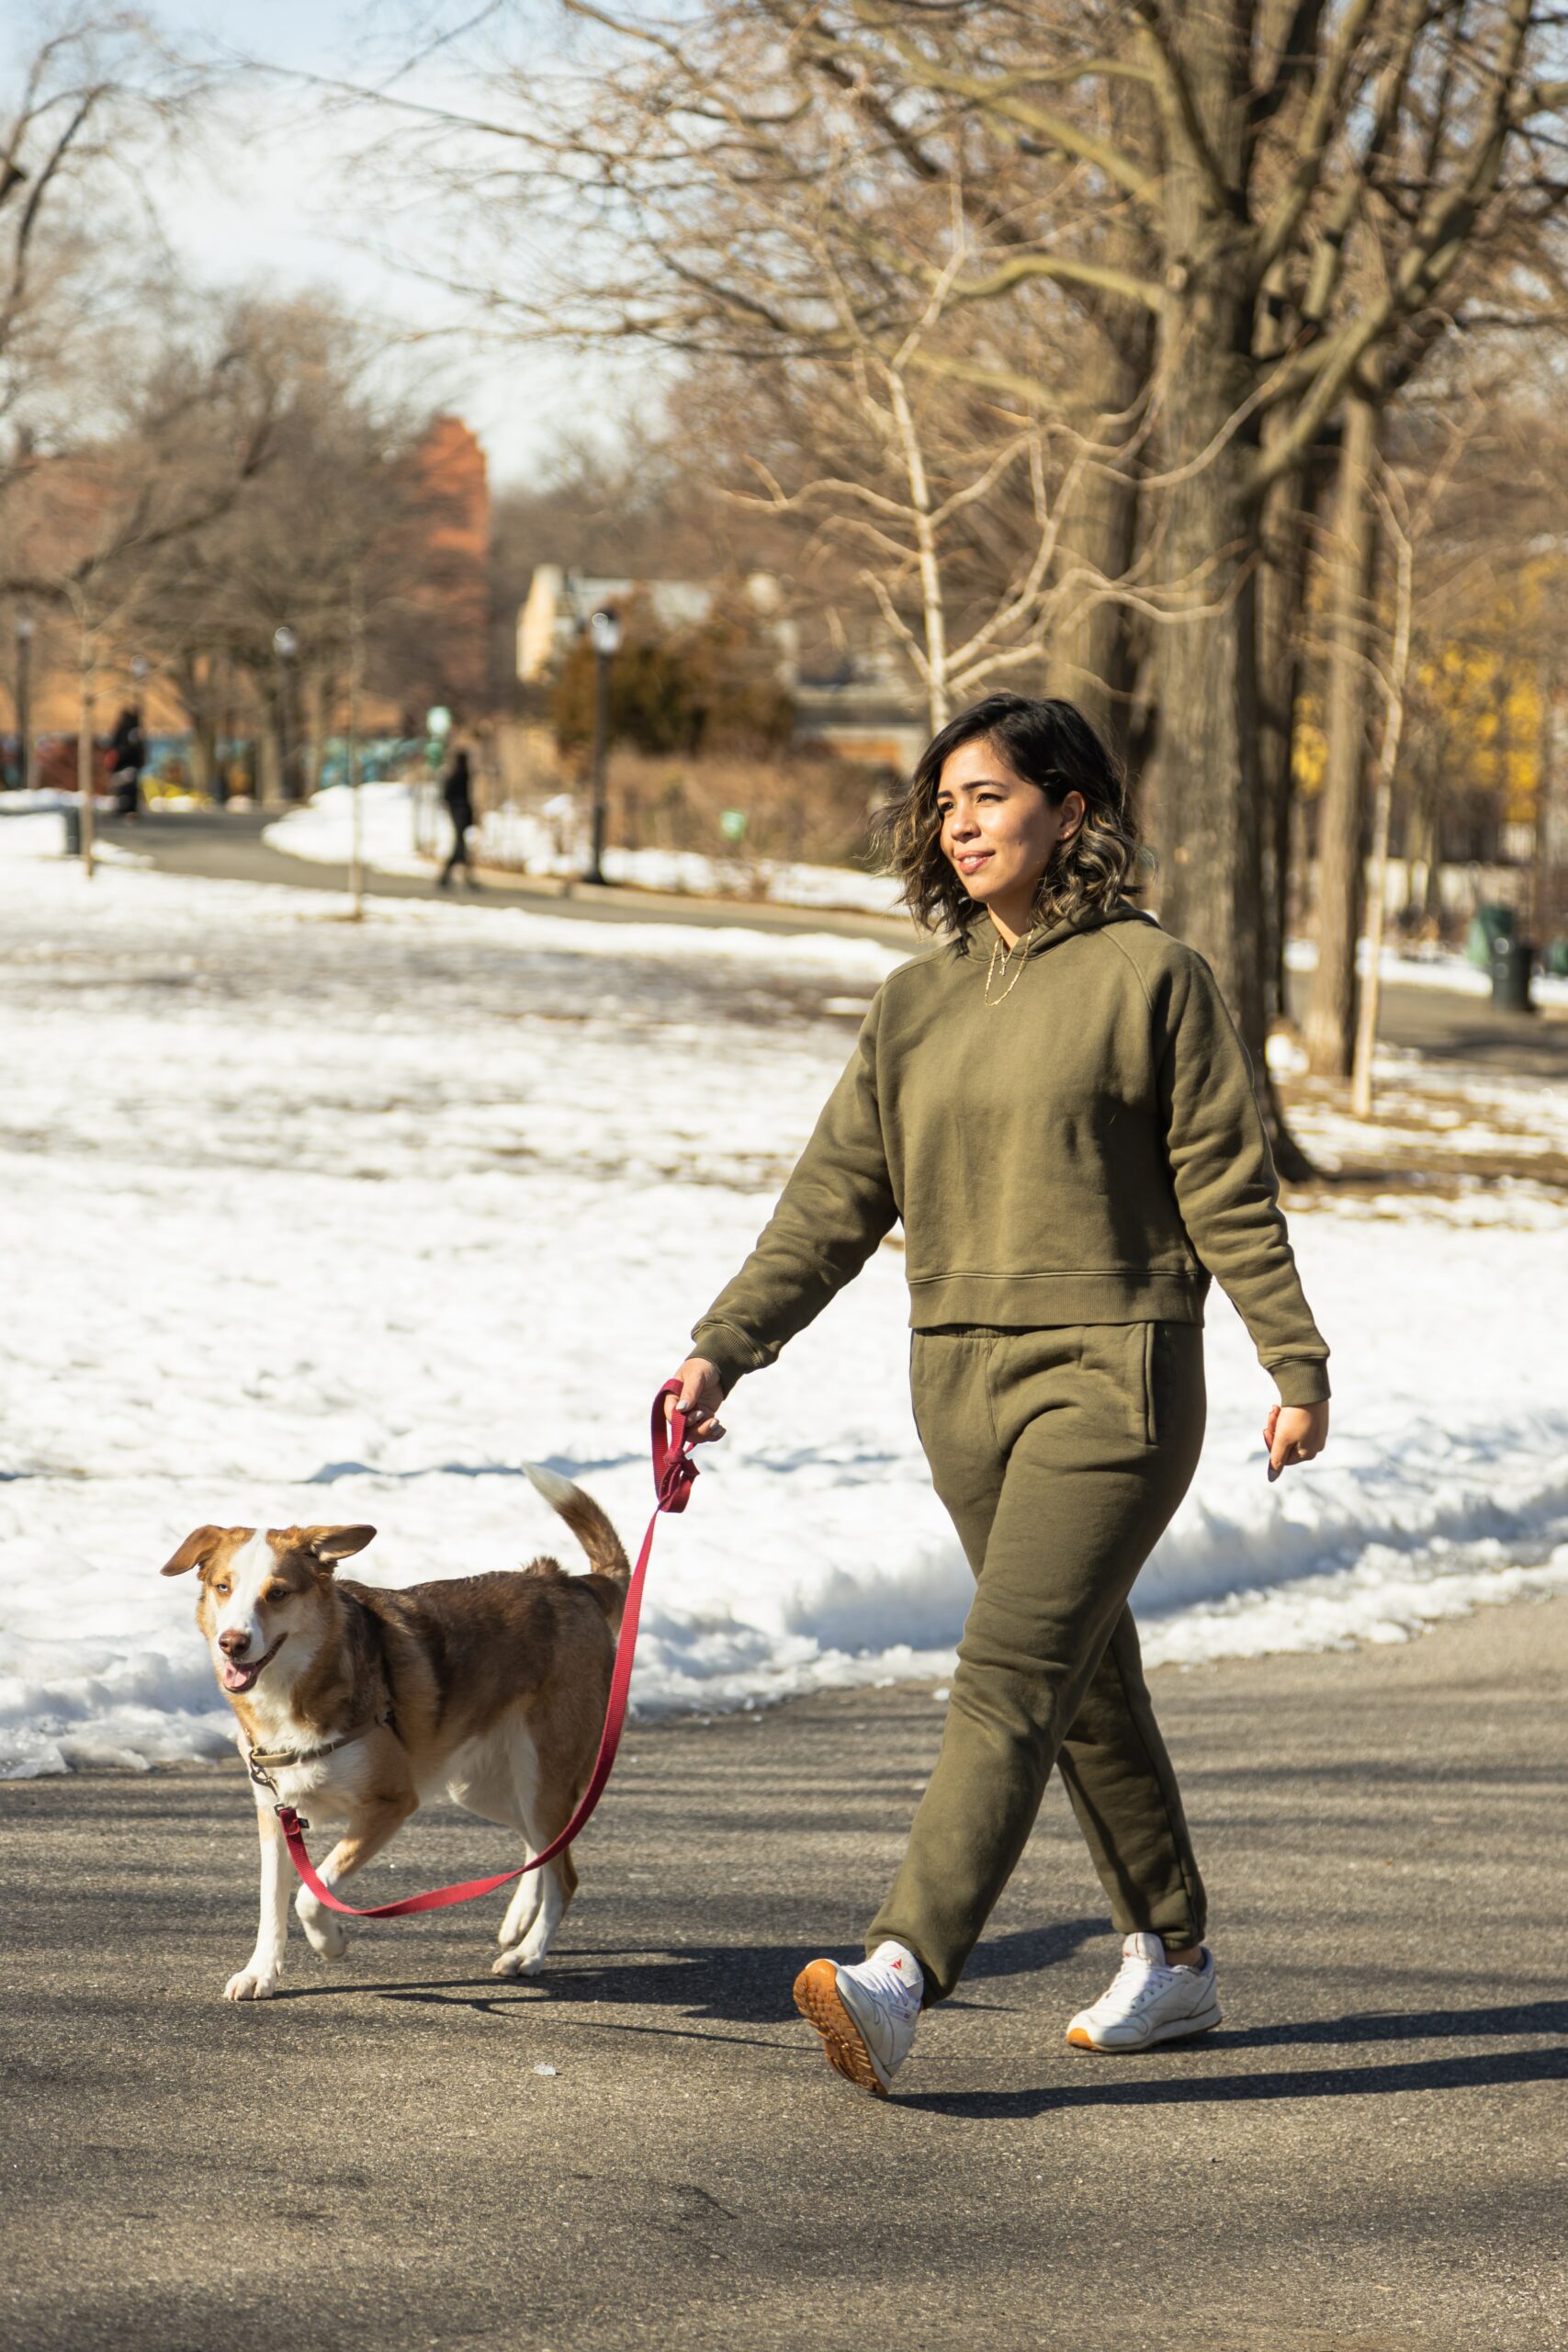 6 Workouts You Can Do With Your Dog